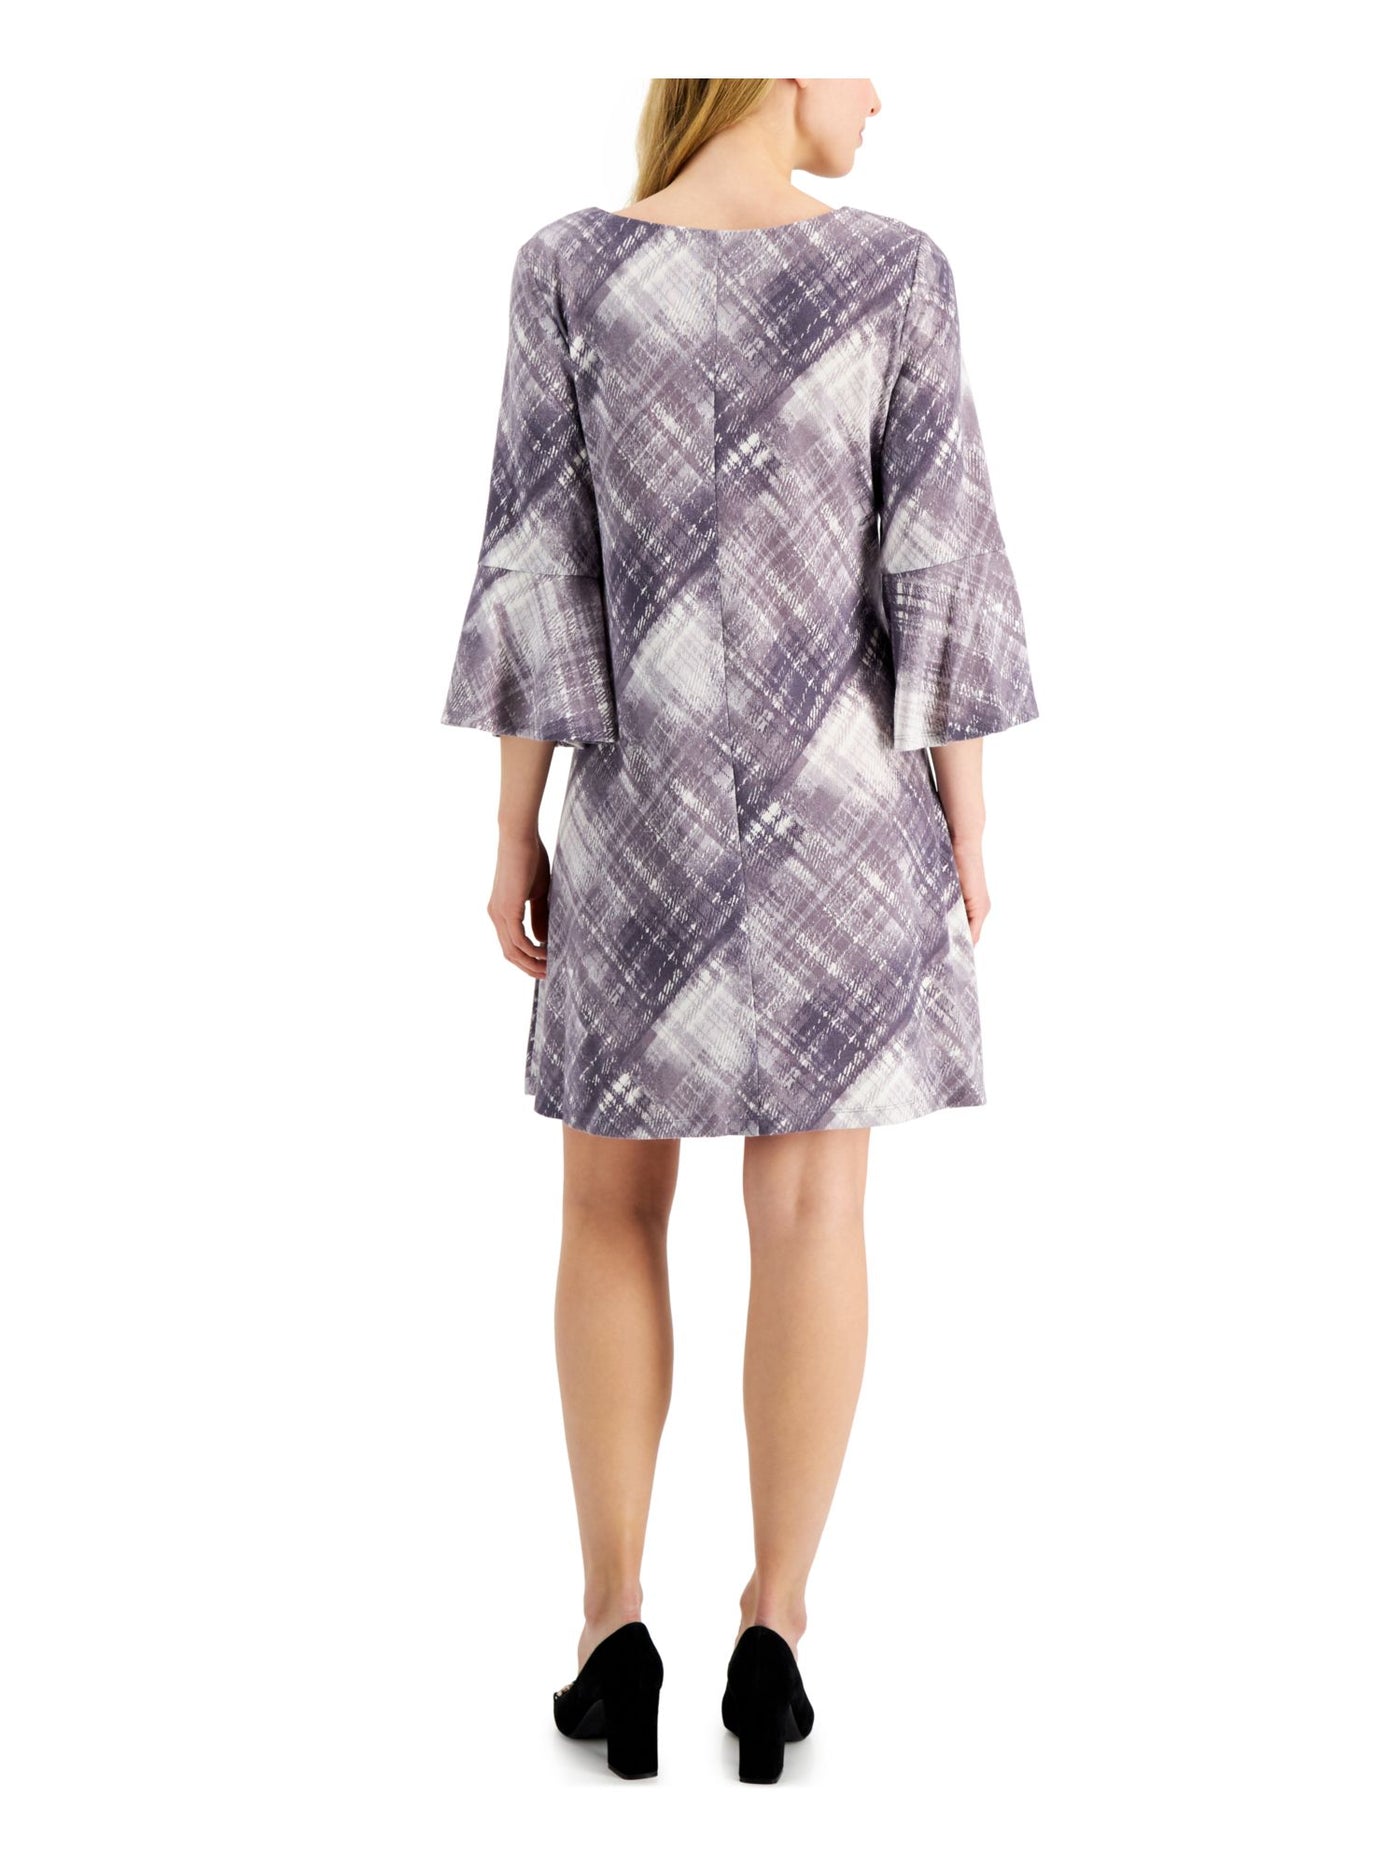 CONNECTED APPAREL Womens Purple Stretch Plaid Bell Sleeve Round Neck Short Wear To Work Fit + Flare Dress Petites 12P